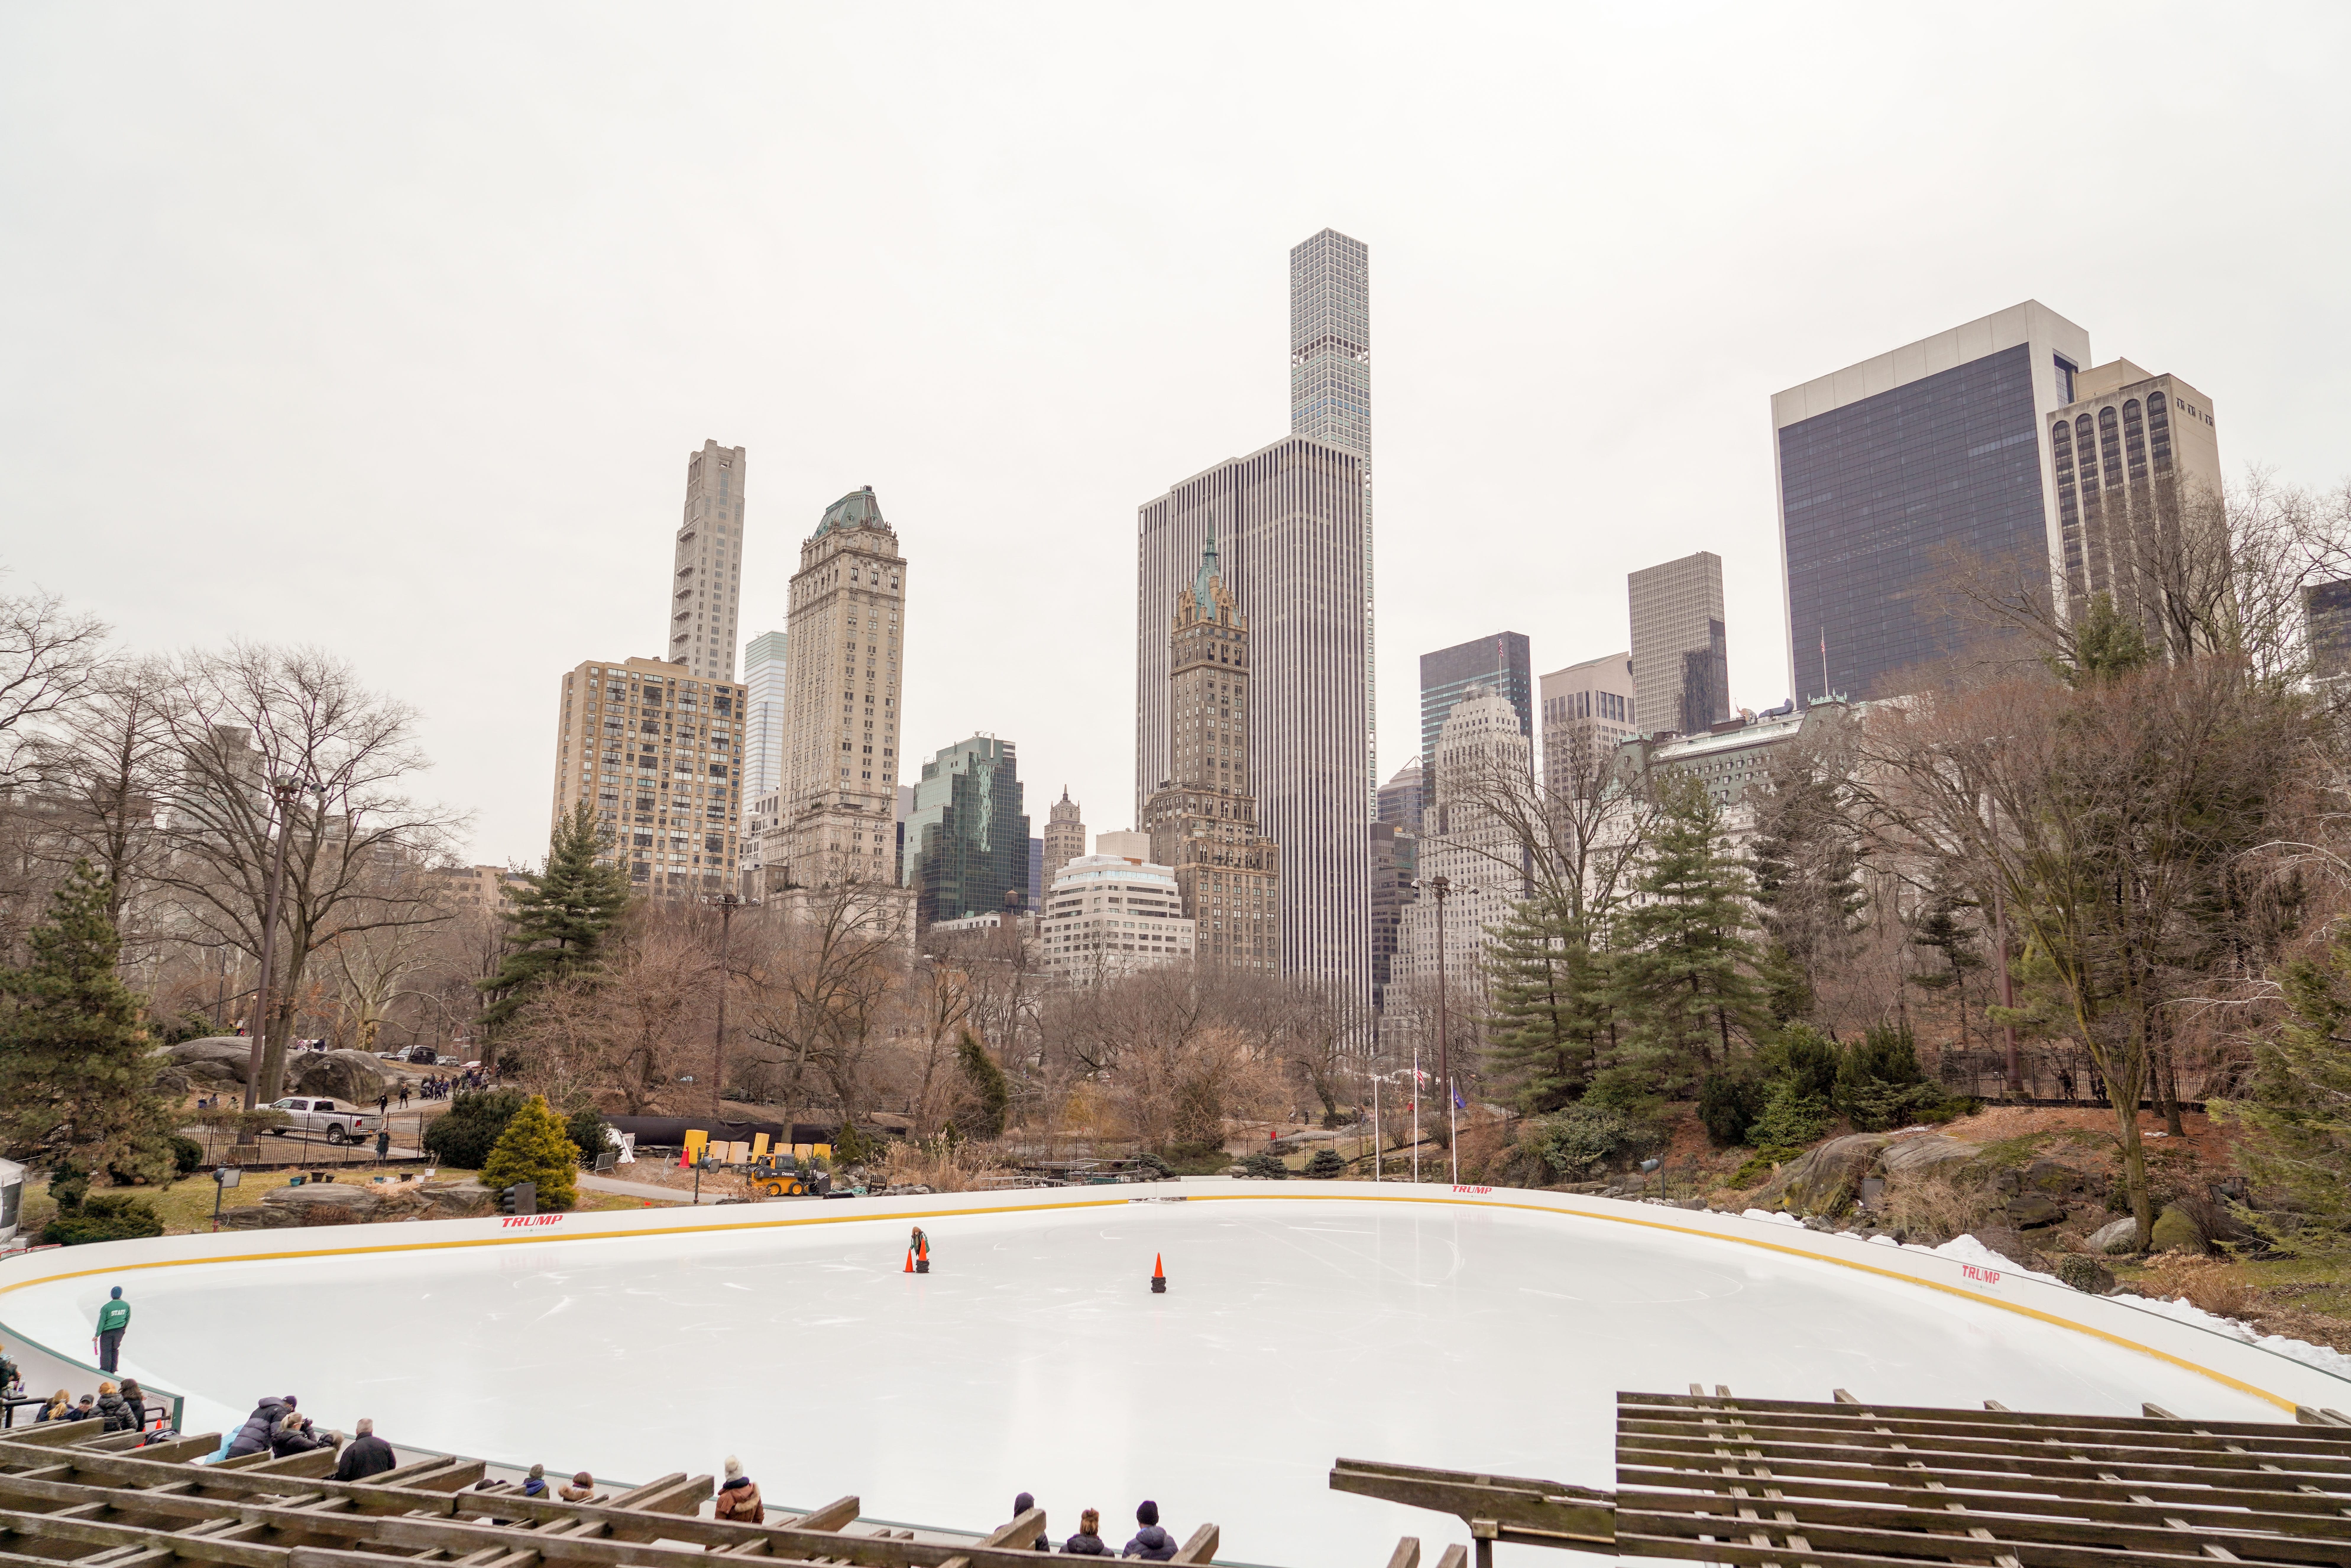 BLOG: A Slice of the Past: Winter Recreation in New York’s Central Park